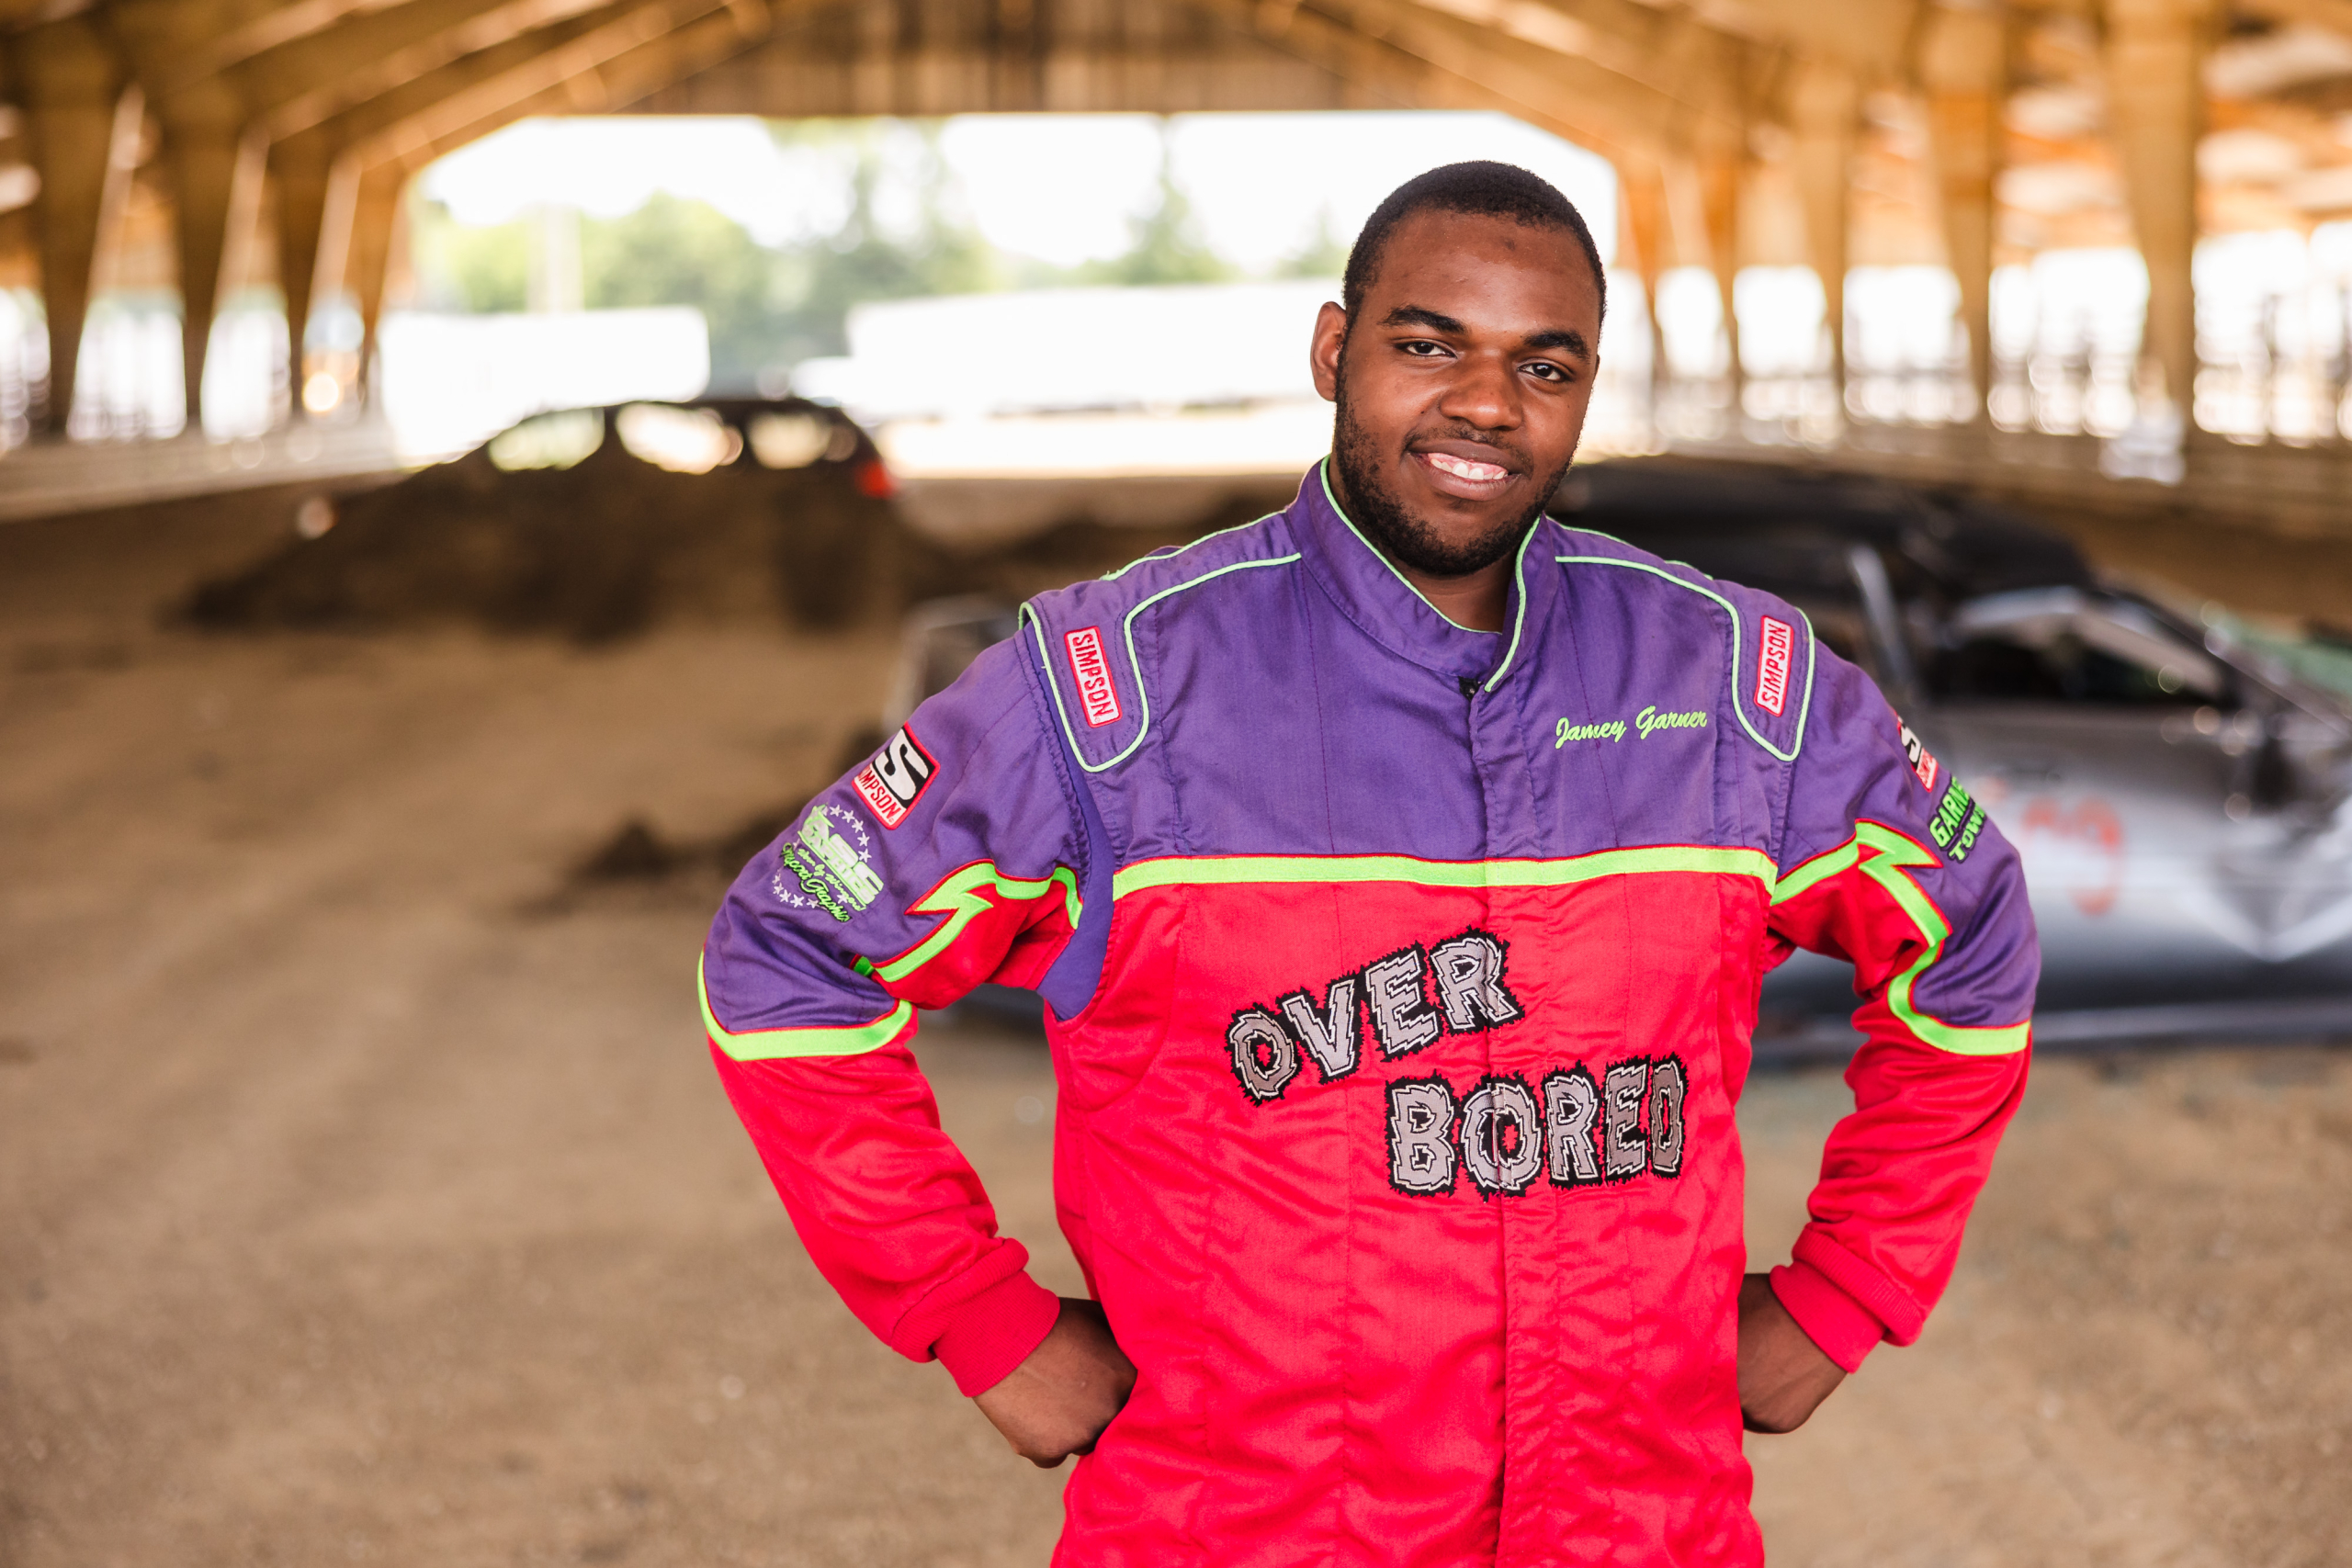 Peoria Man Becomes First Black Man with Autism to Drive A Monster Truck